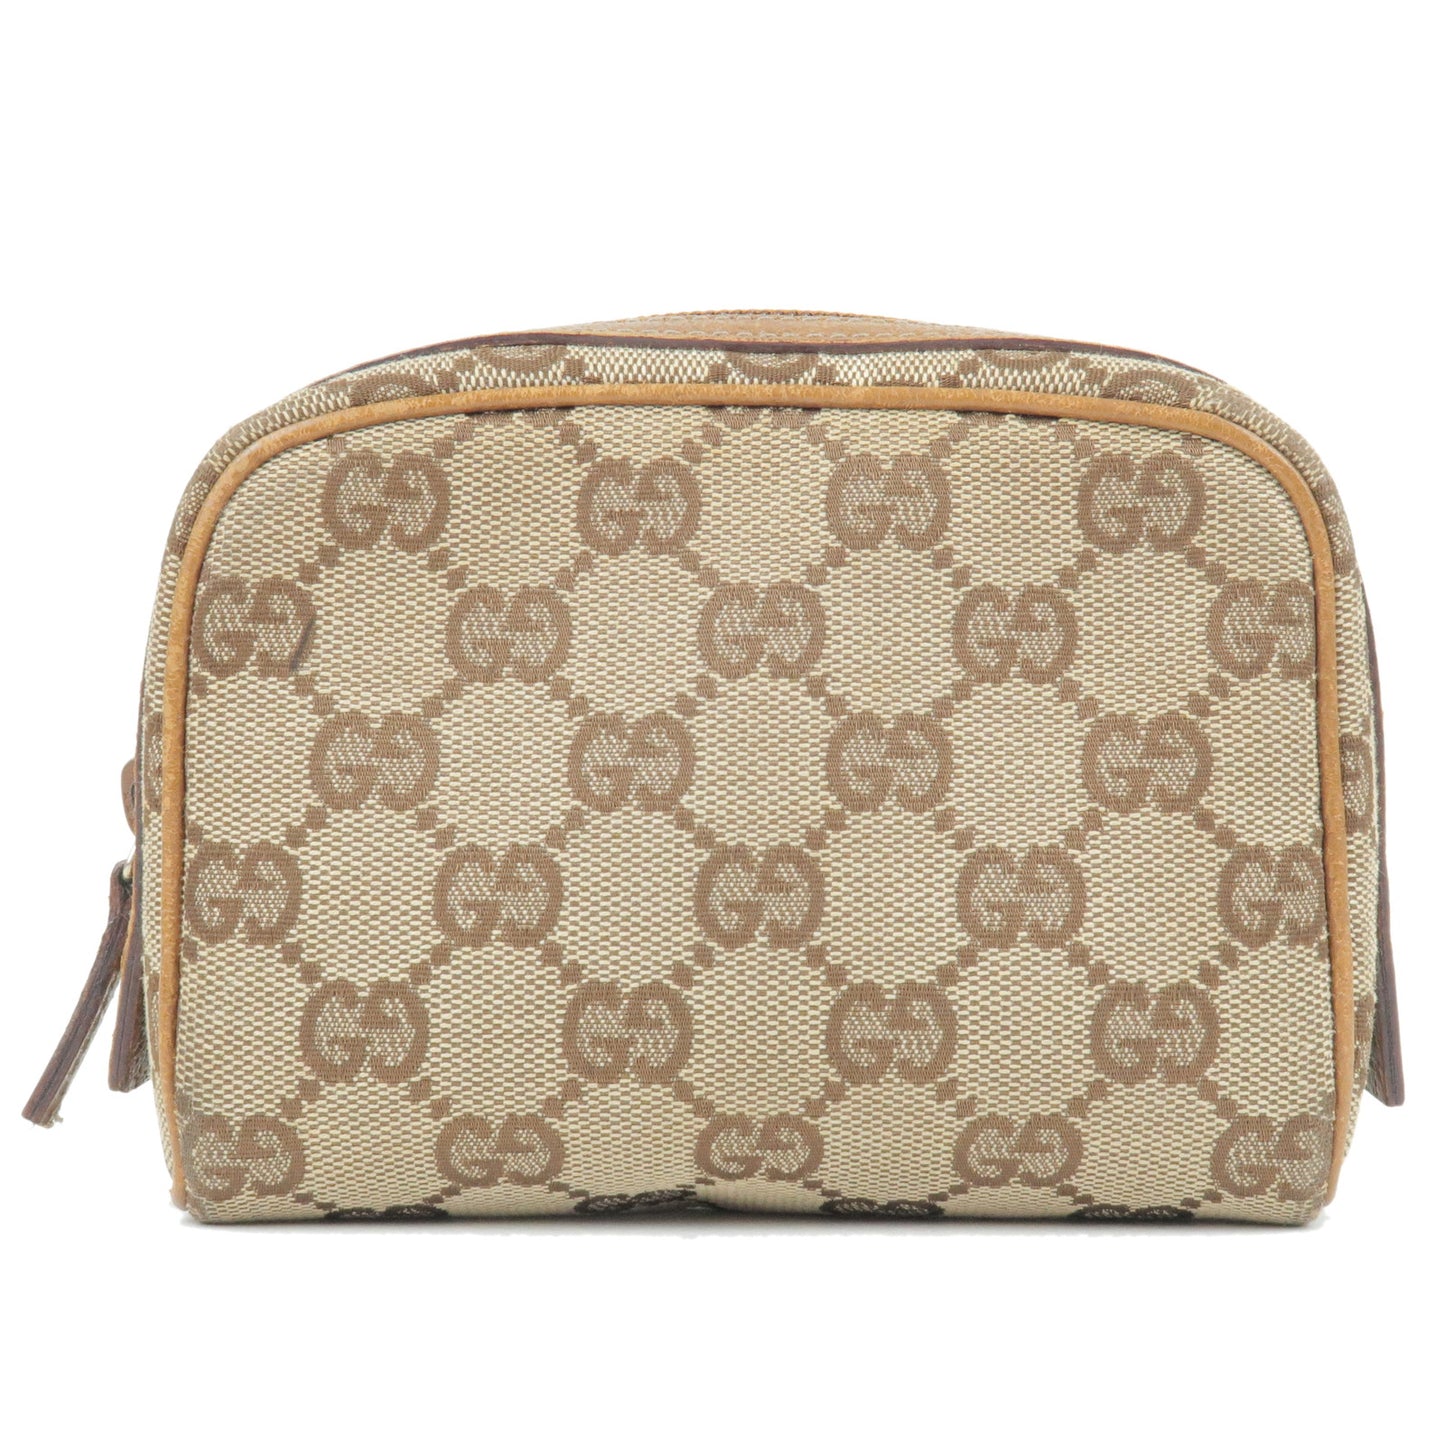 GUCCI-GG-Canvas-Leather-Pouch-Mini-Cosmetic-Bag-Brown-120978